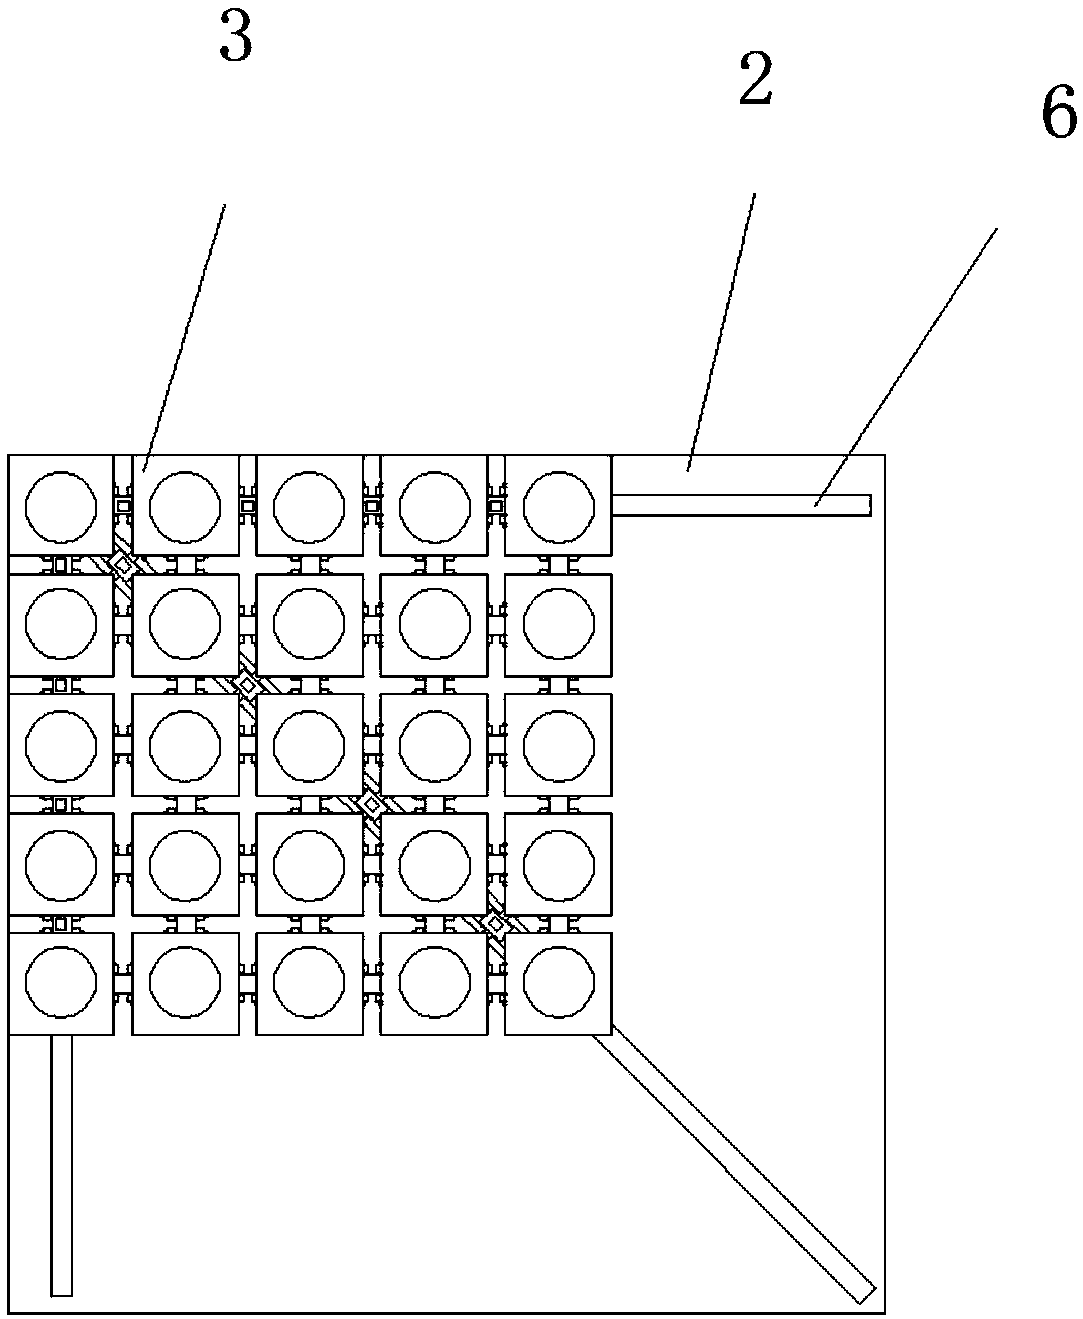 Seedling growth apparatus for agricultural greenhouse